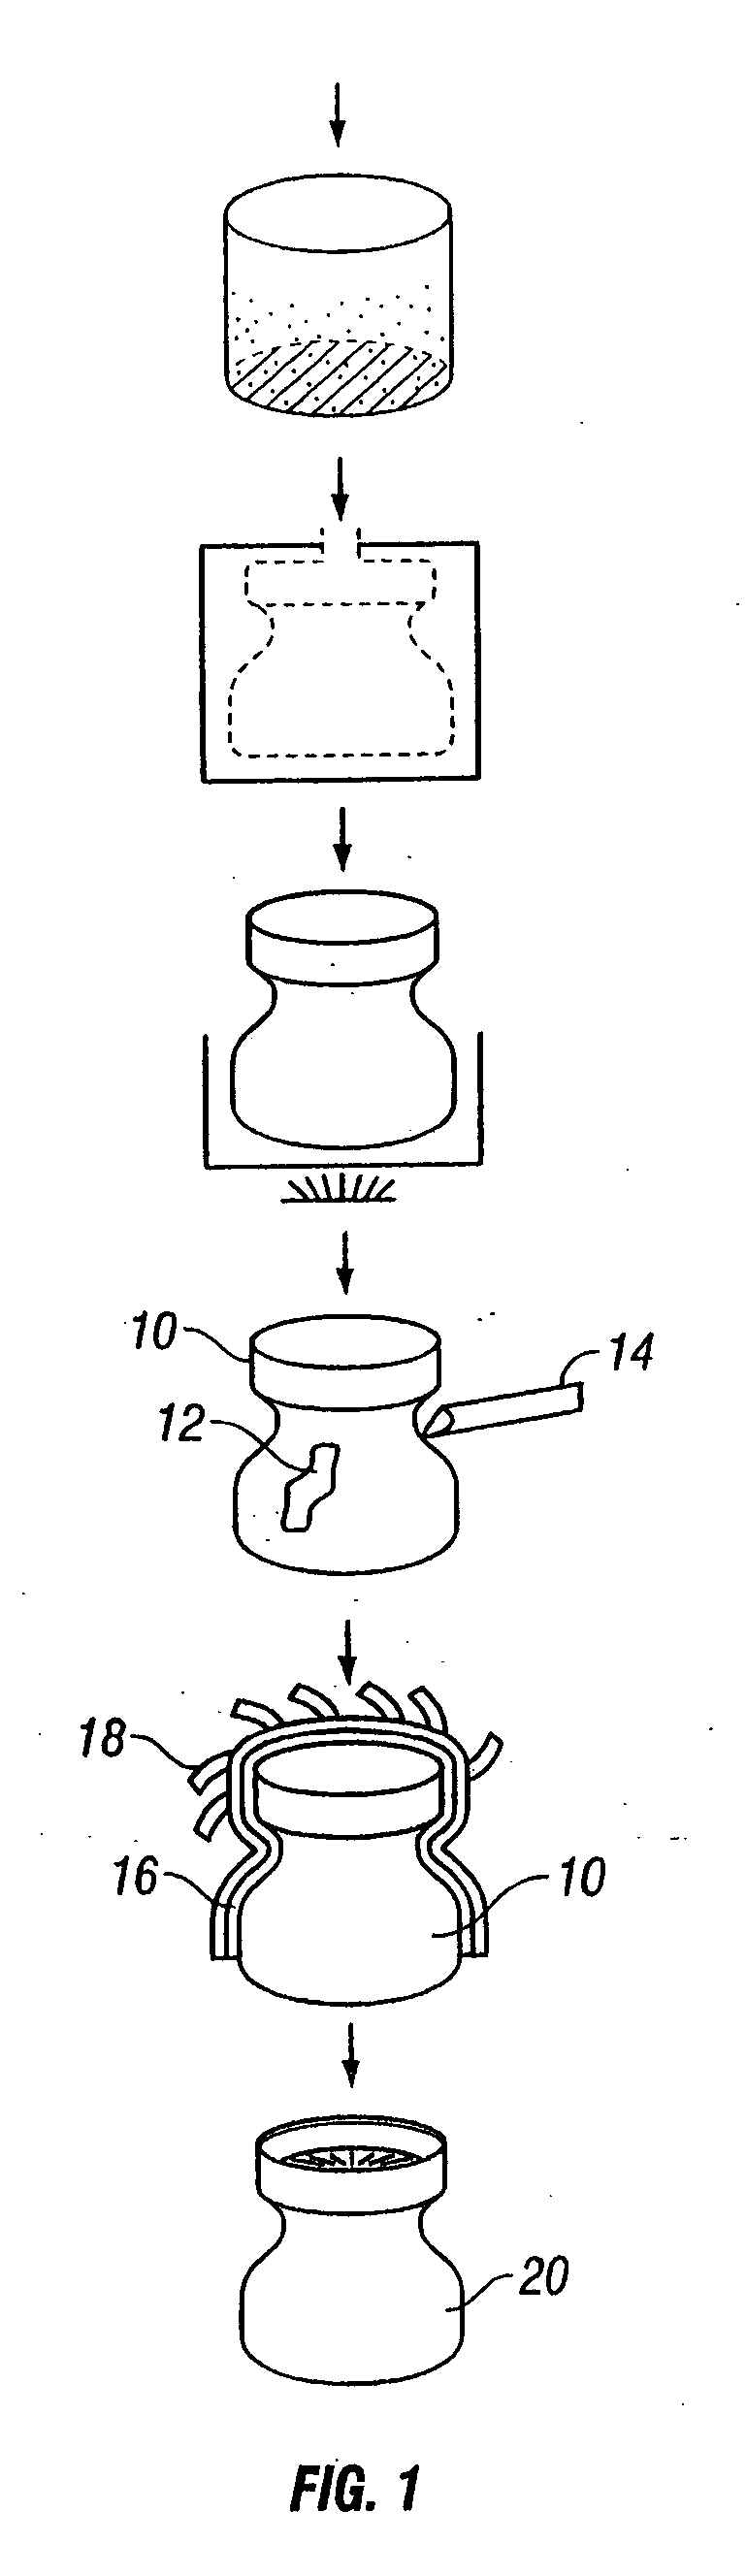 Water soluble tooling materials for composite structures